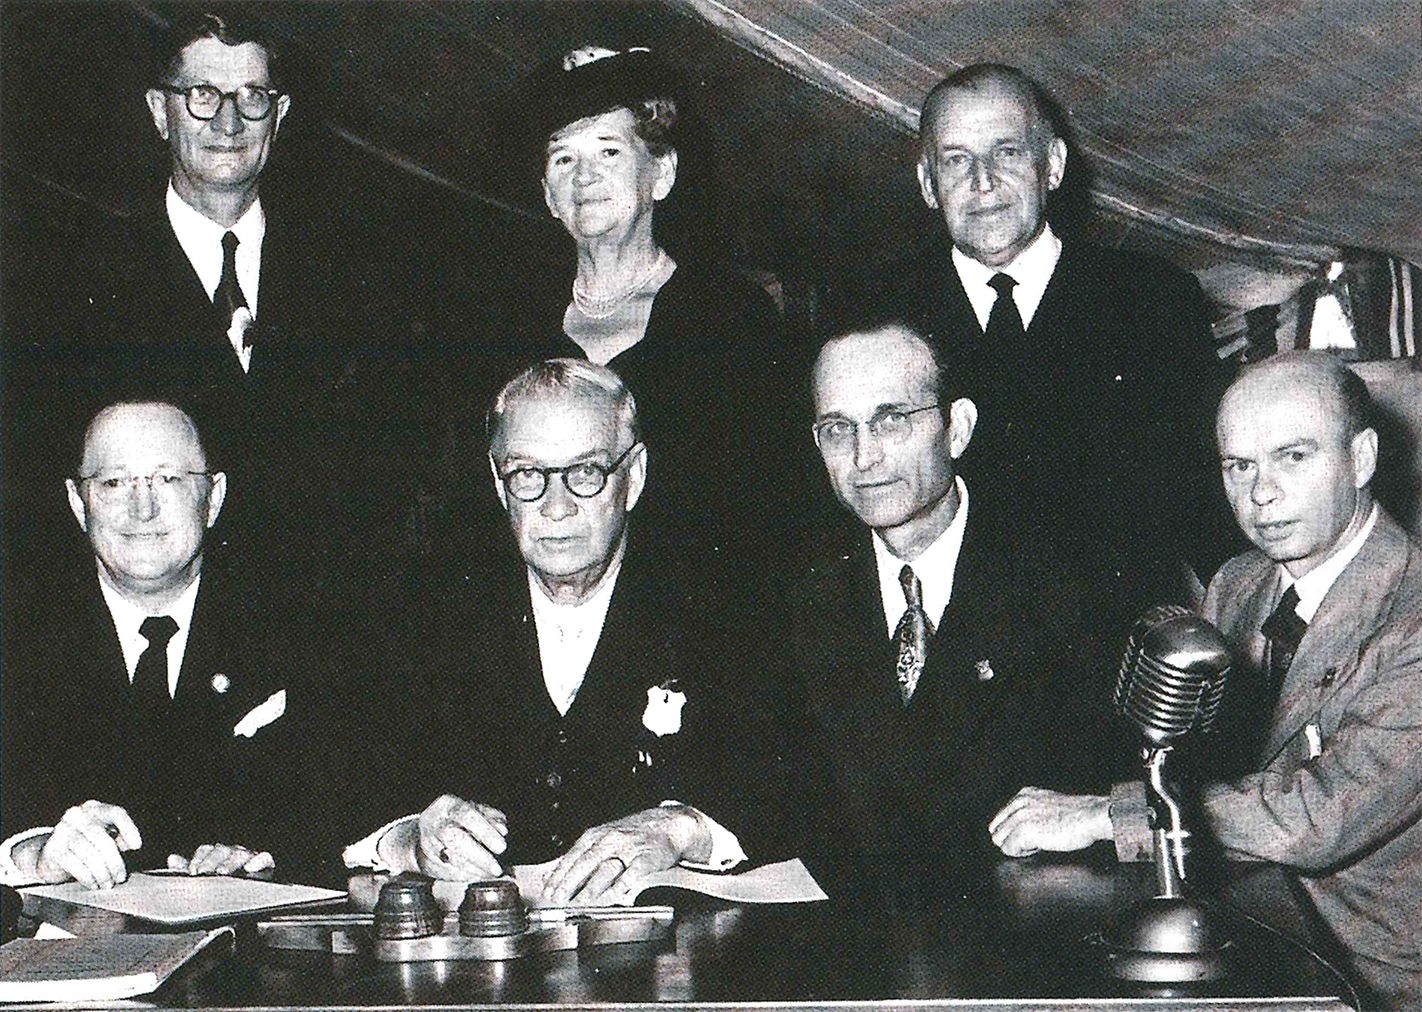 Seated at the table are signers of the amalgamation agreement: J. H. Walker Sr.; F. J. M. Beetge, moderator of the Full Gospel Church; H. L. Chesser; and H. R. Carter, secretary general of the Full Gospel Church. Witnessing the ceremony are J. H. Saayman, Mrs. Saayman, and A. H. Cooper